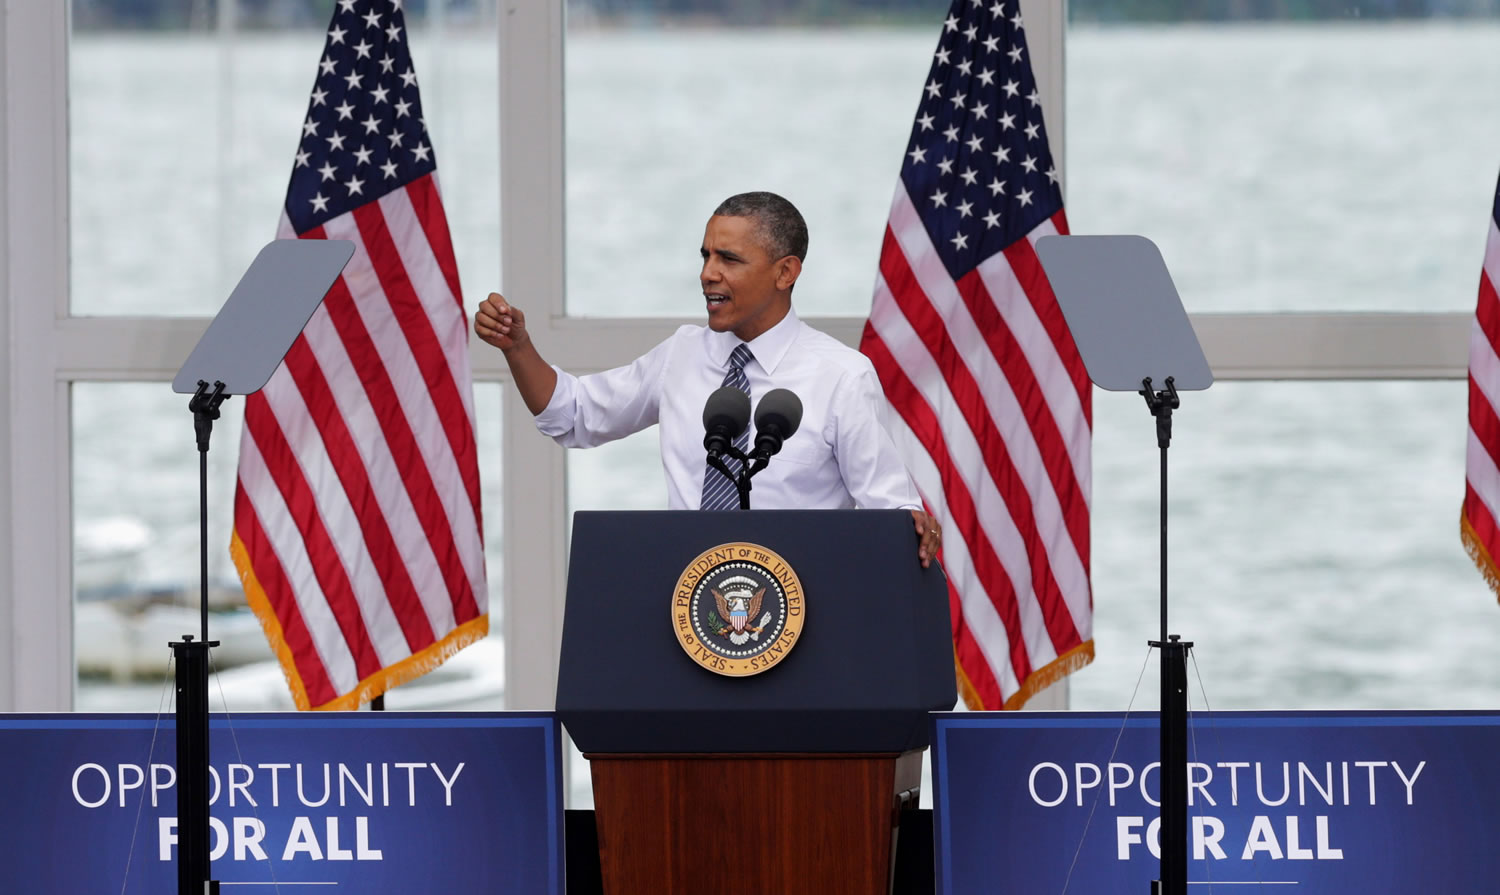 President Barack Obama gives an economic policy speech at the Lake Harriet Bandshell on Friday in Minneapolis for the first in a series of Day-in-the-Life visits that he plans to make across the country this summer.